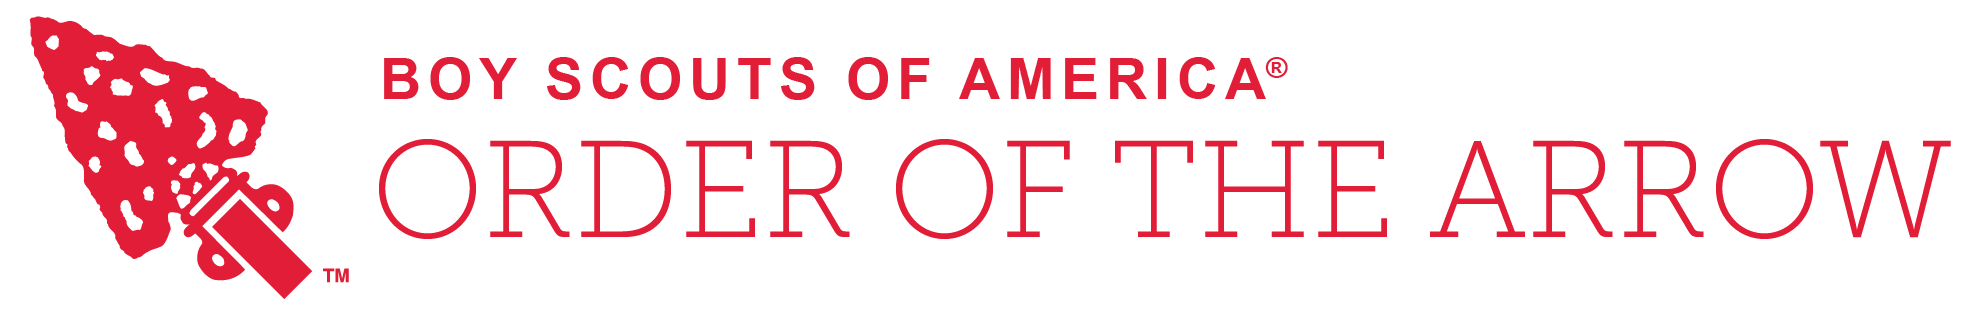 Red Email Logo - Branding | Order of the Arrow, Boy Scouts of America